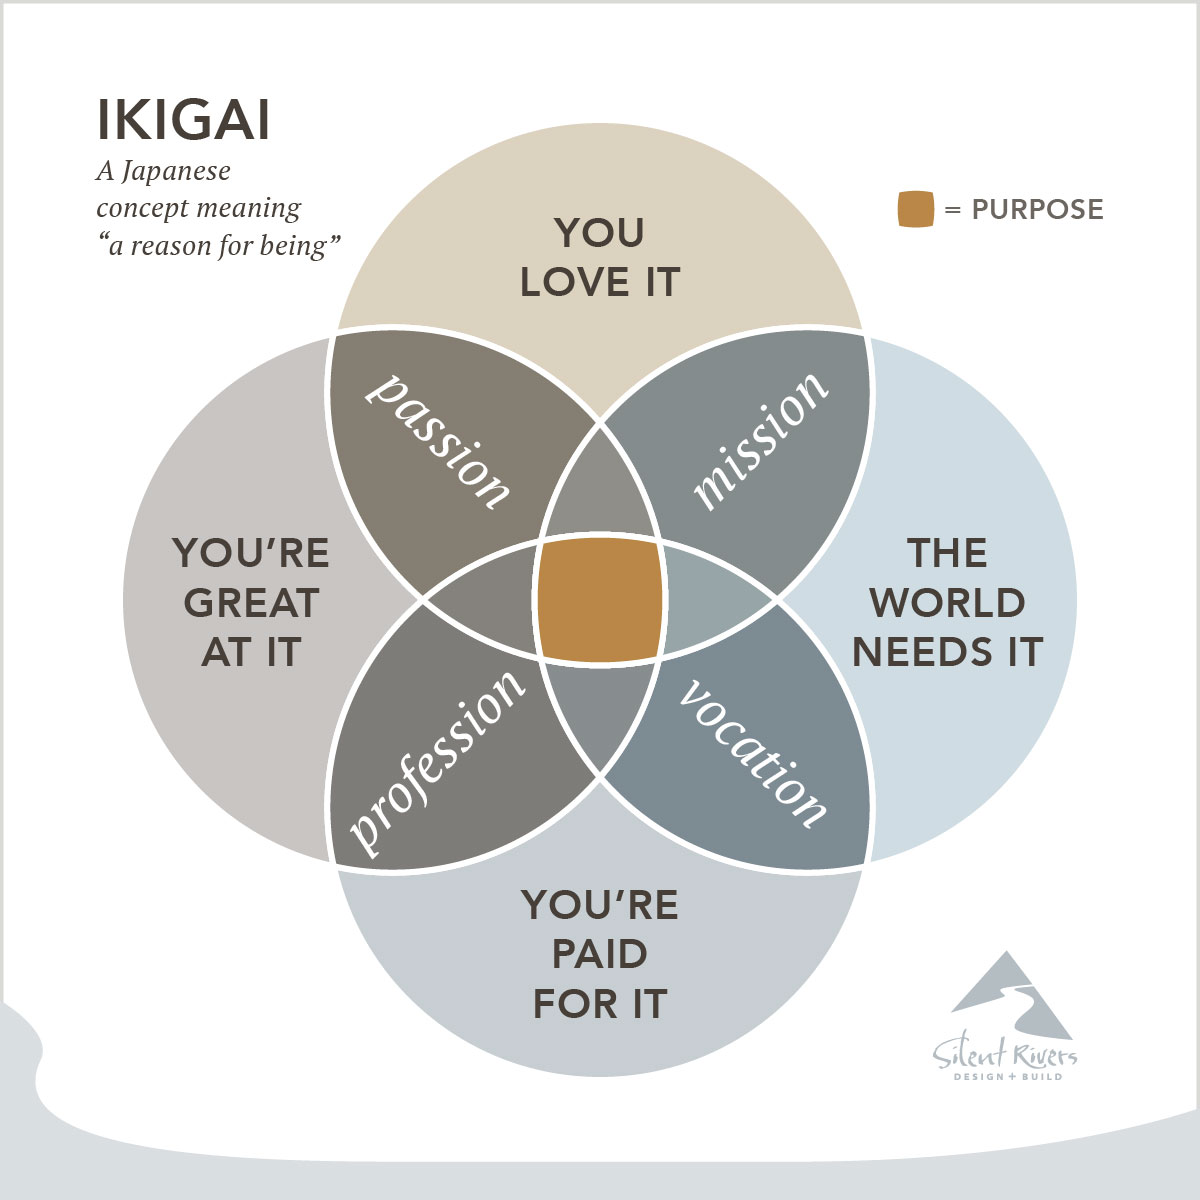 The Silent Rivers Ikigai: Ikigai is a Japanese concept meaning "a reason for being".